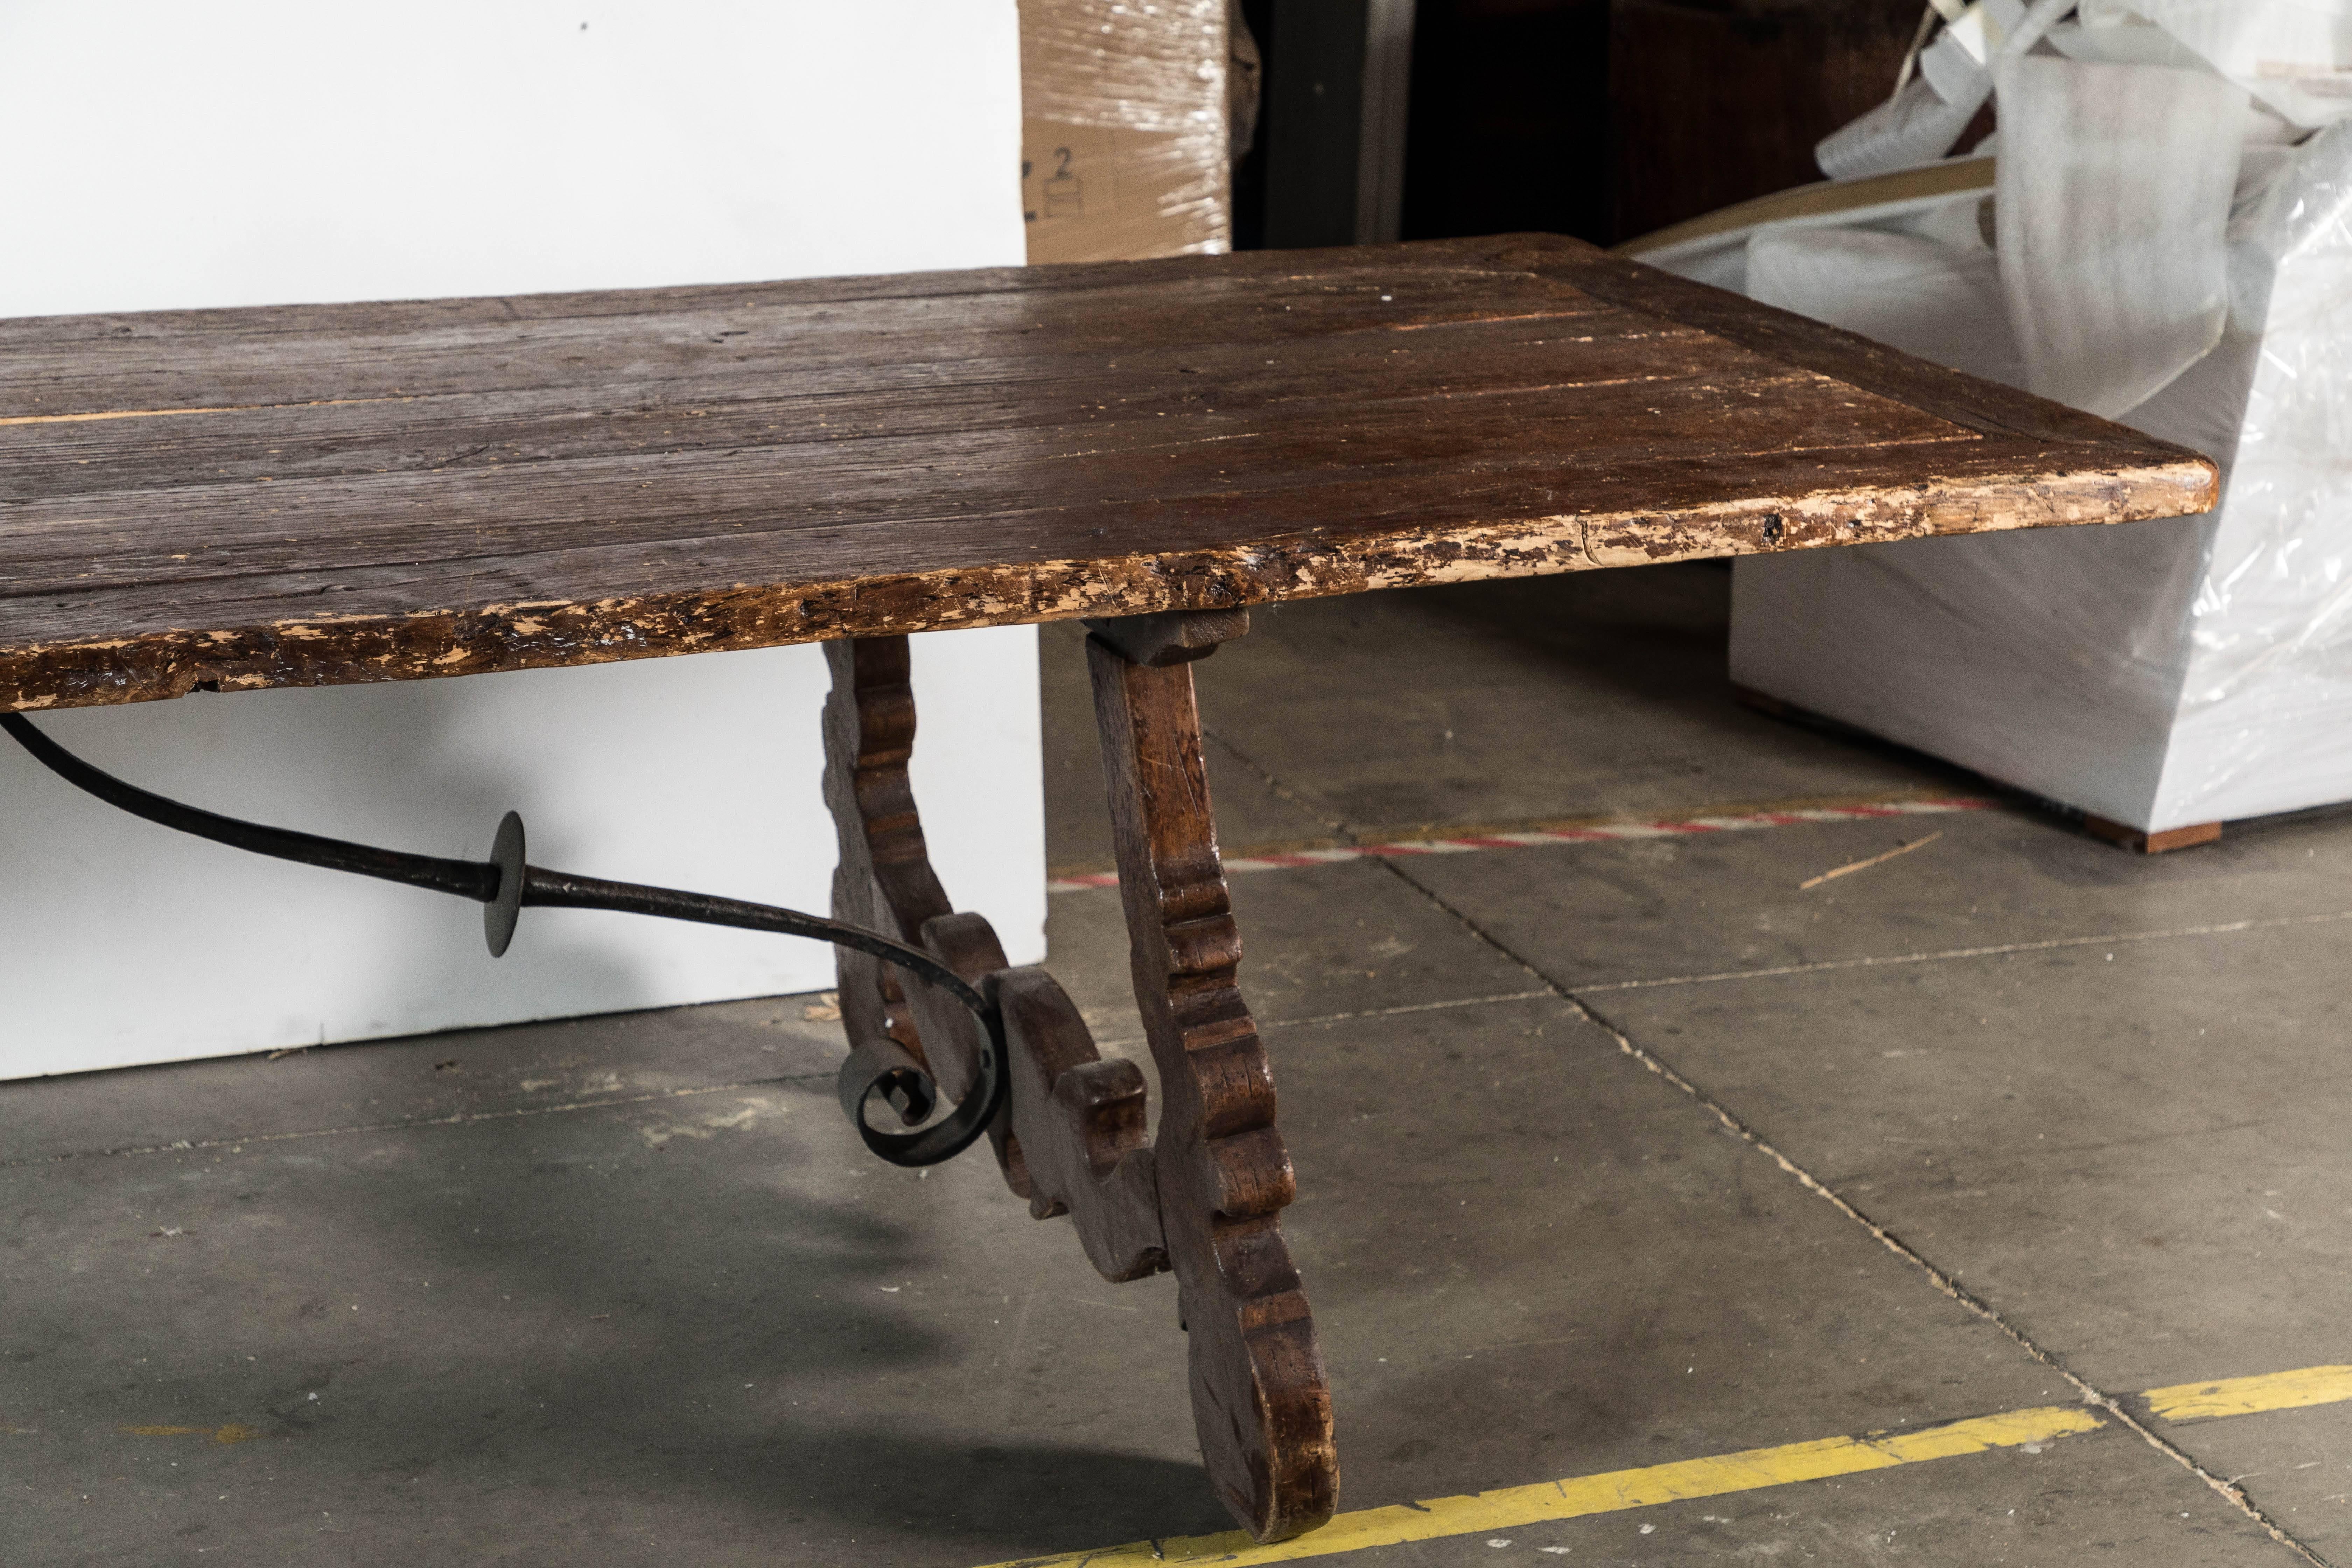 Enormous work table that shows signs of use and wear. Ironwork under the table was added later.